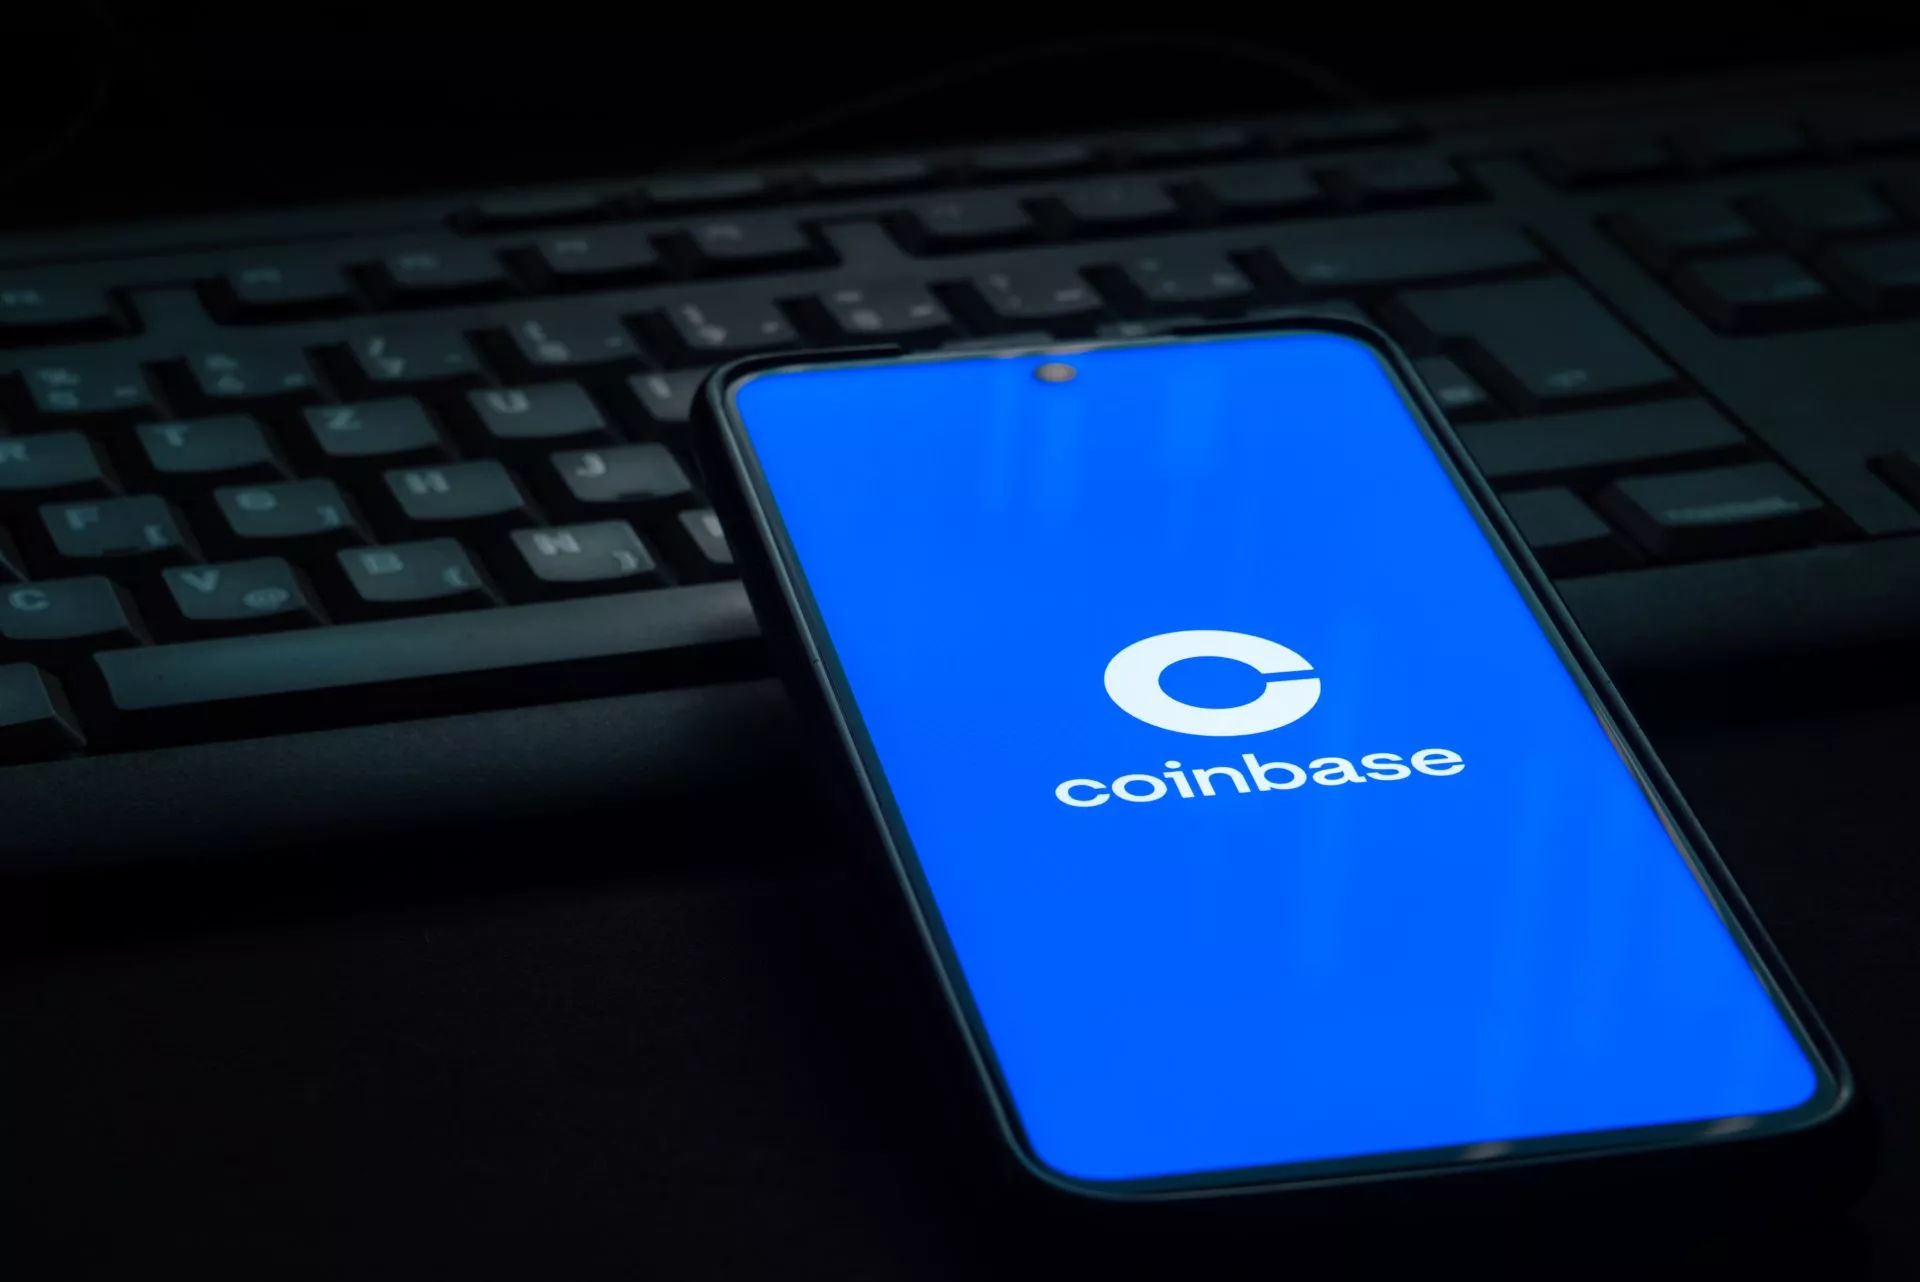 Coinbase cryptocurrency exchange logo on smartphone screen